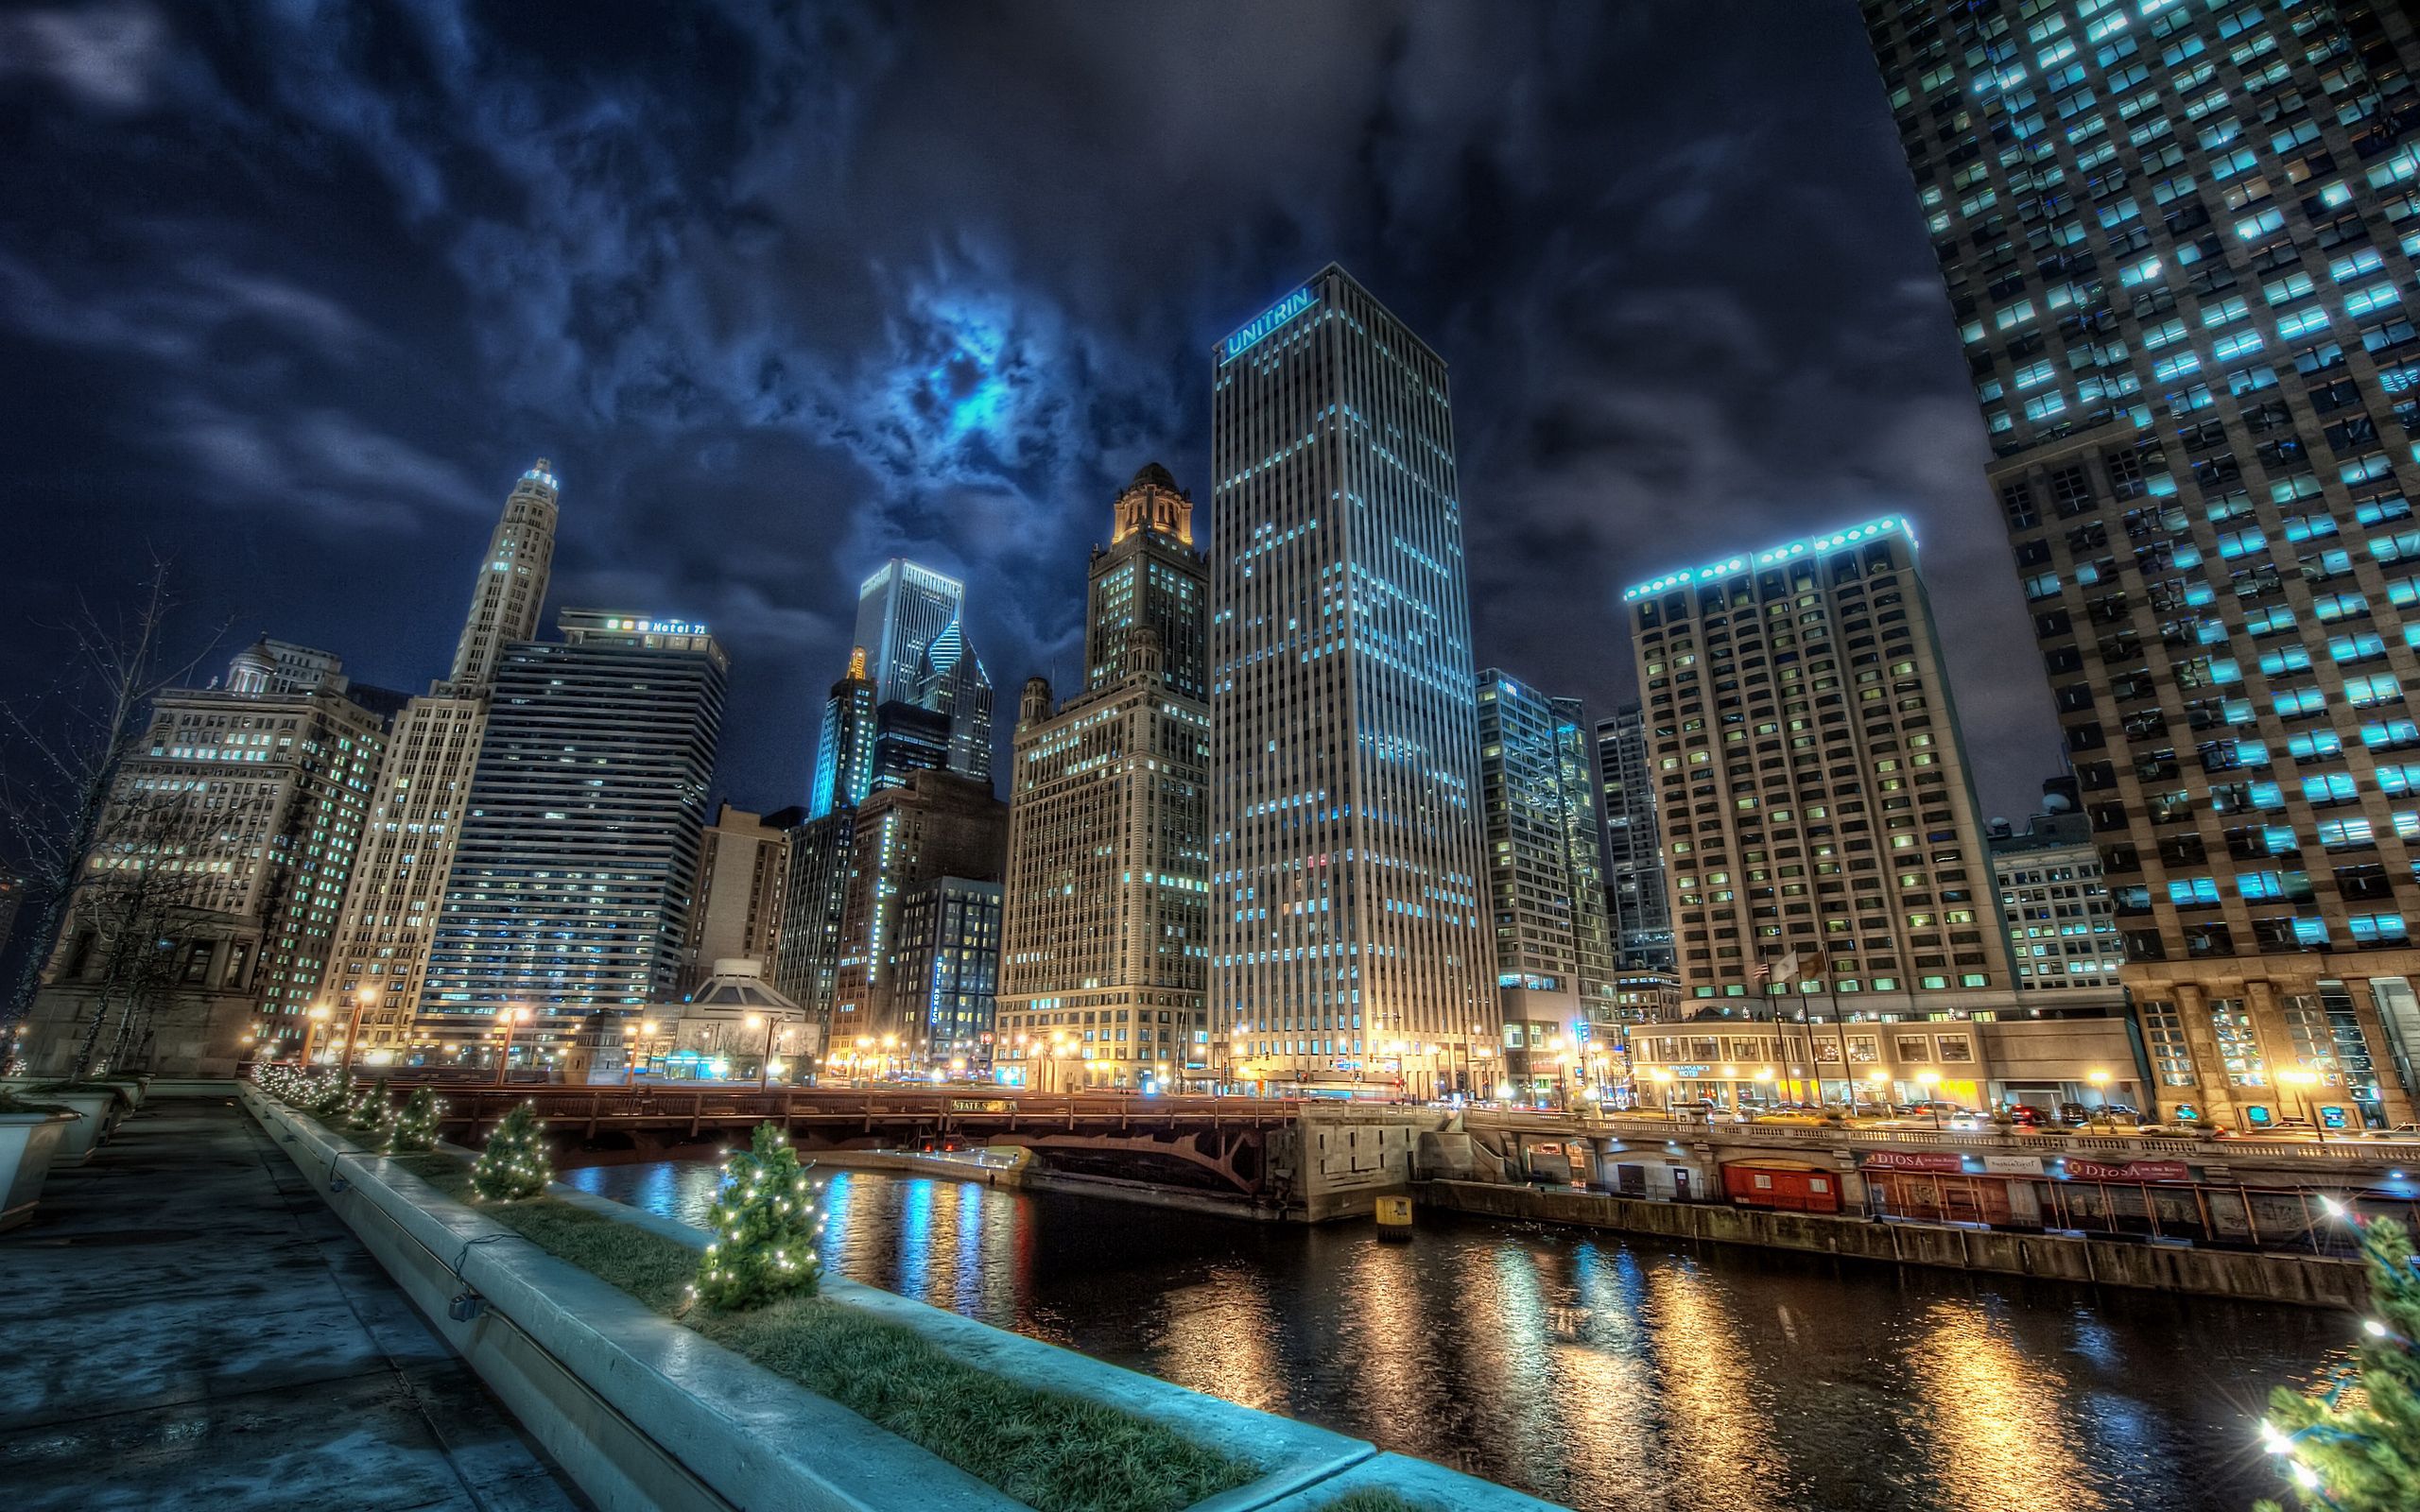 wallpapers cities, water, night, usa, city, lights, reflection, united states, america, chicago, channel, states